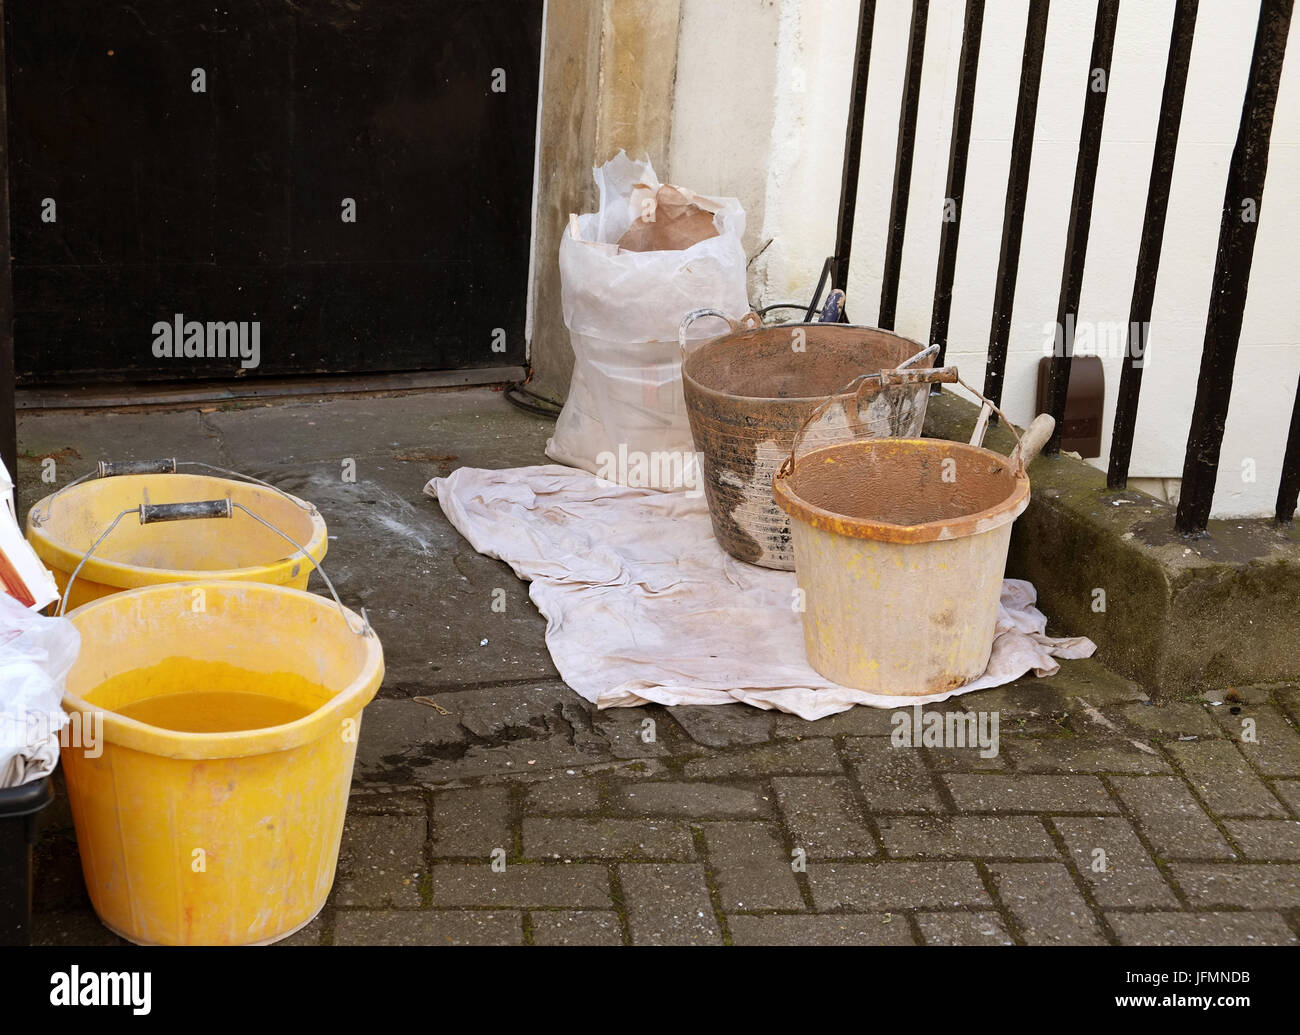 March 2015 - Plasterers buckets and tools outside the front door of a large London city residential home which is being refurbished. Stock Photo